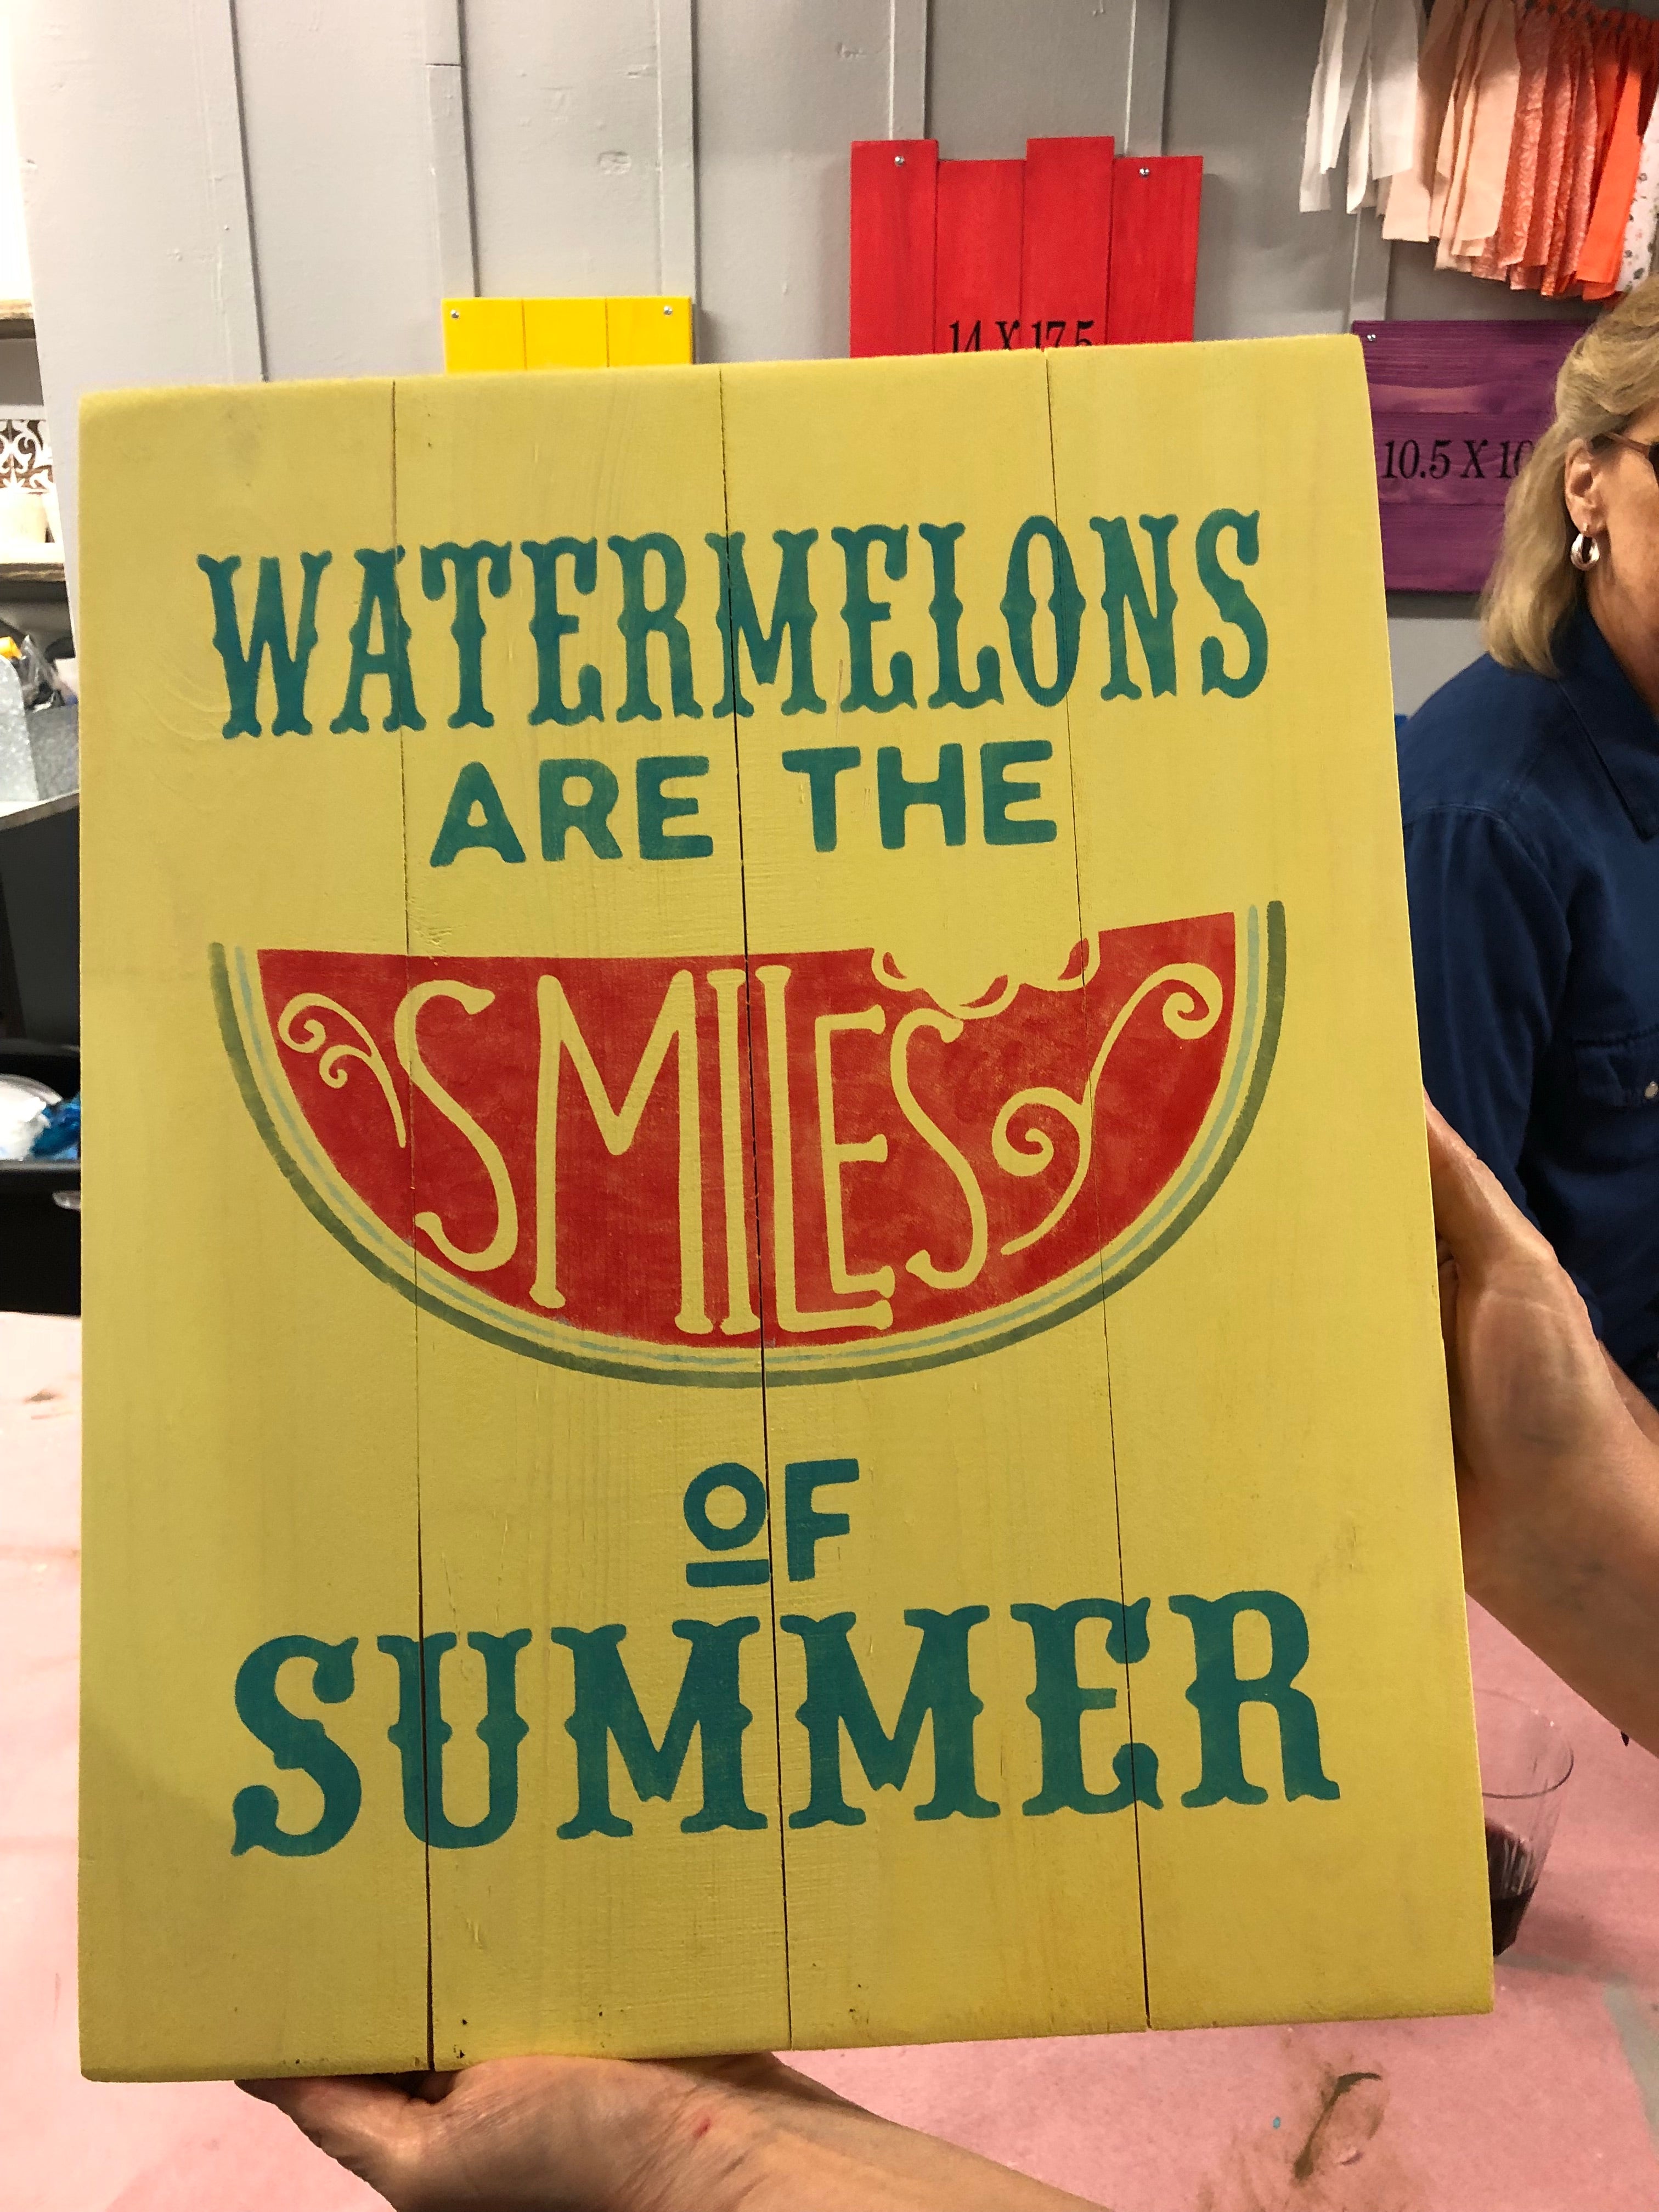 Watermelons are the smiles of summer